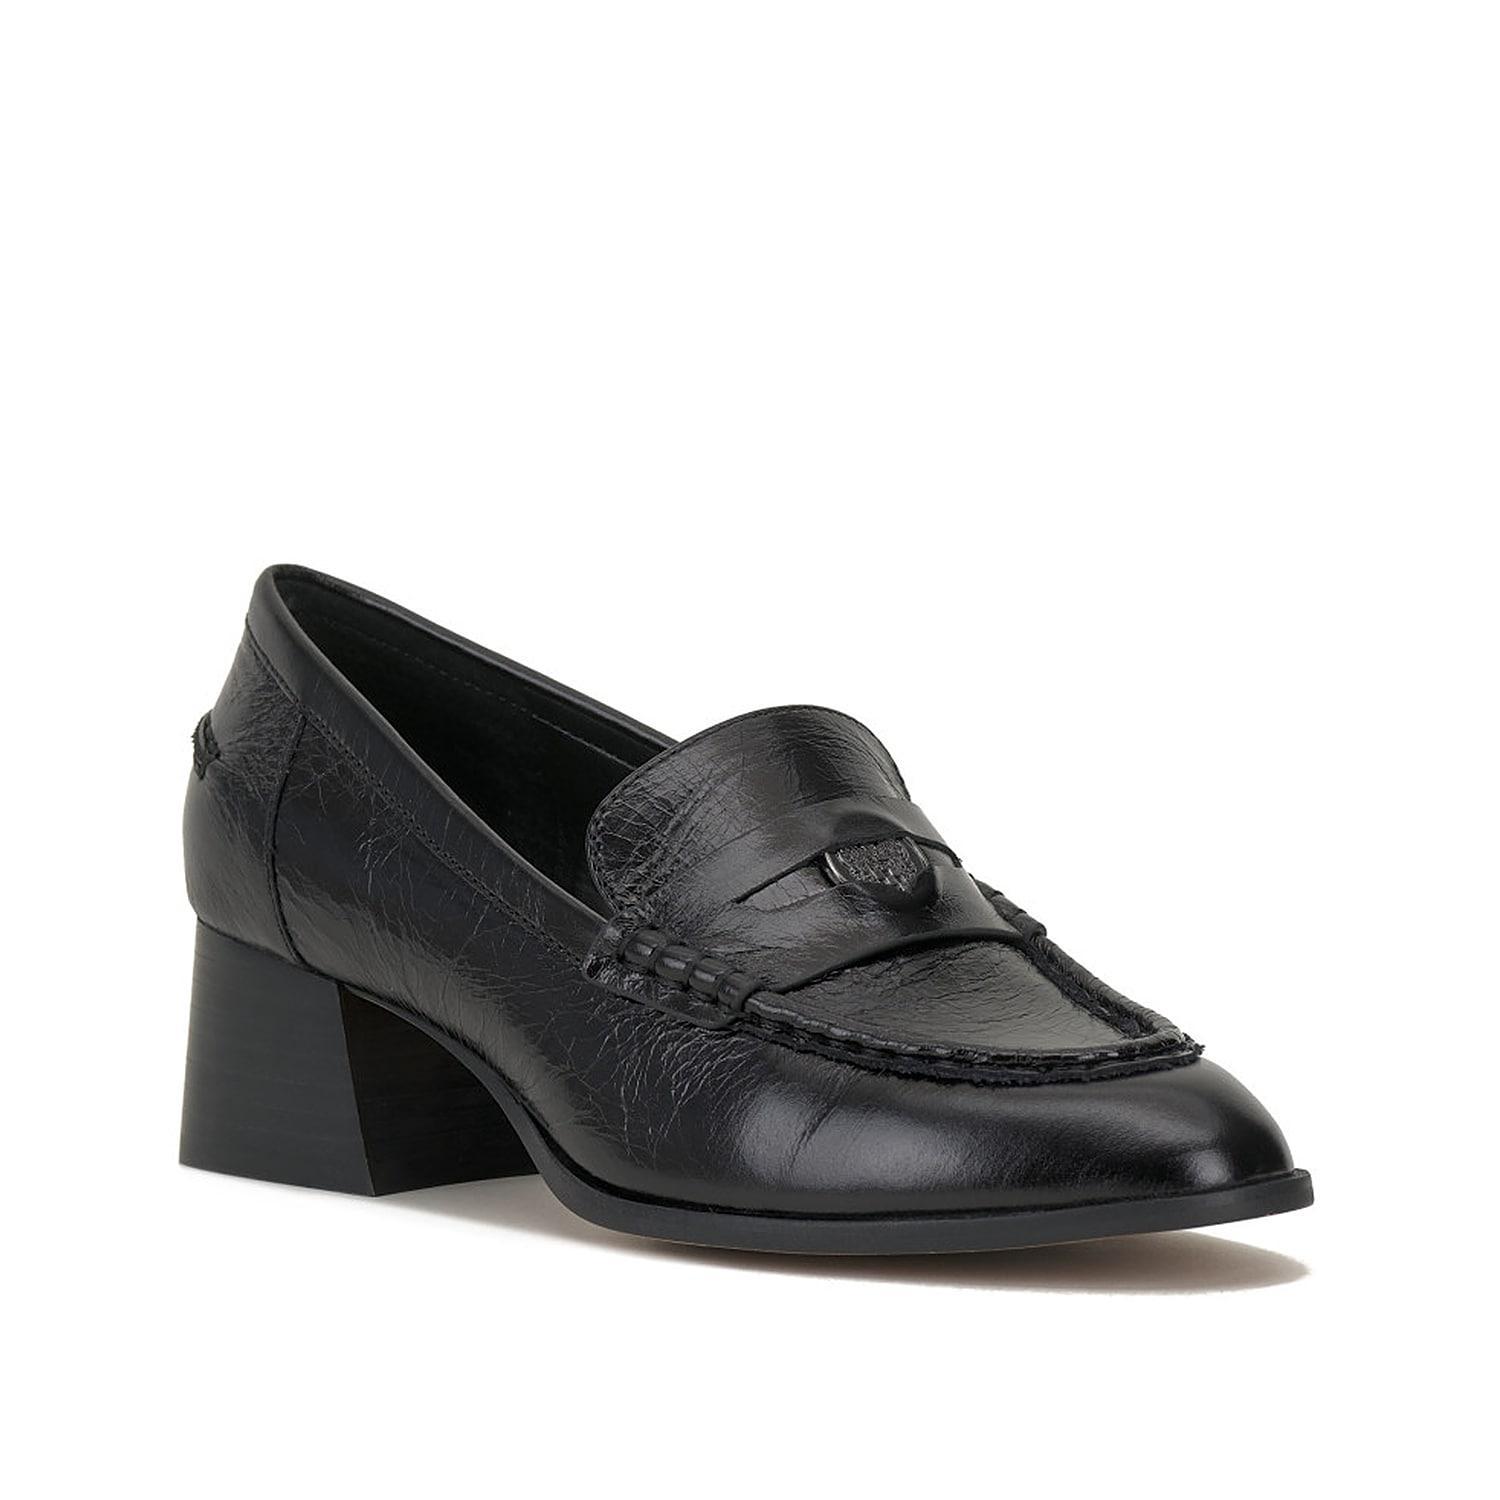 Vince Camuto Carissla Loafer Pump Product Image